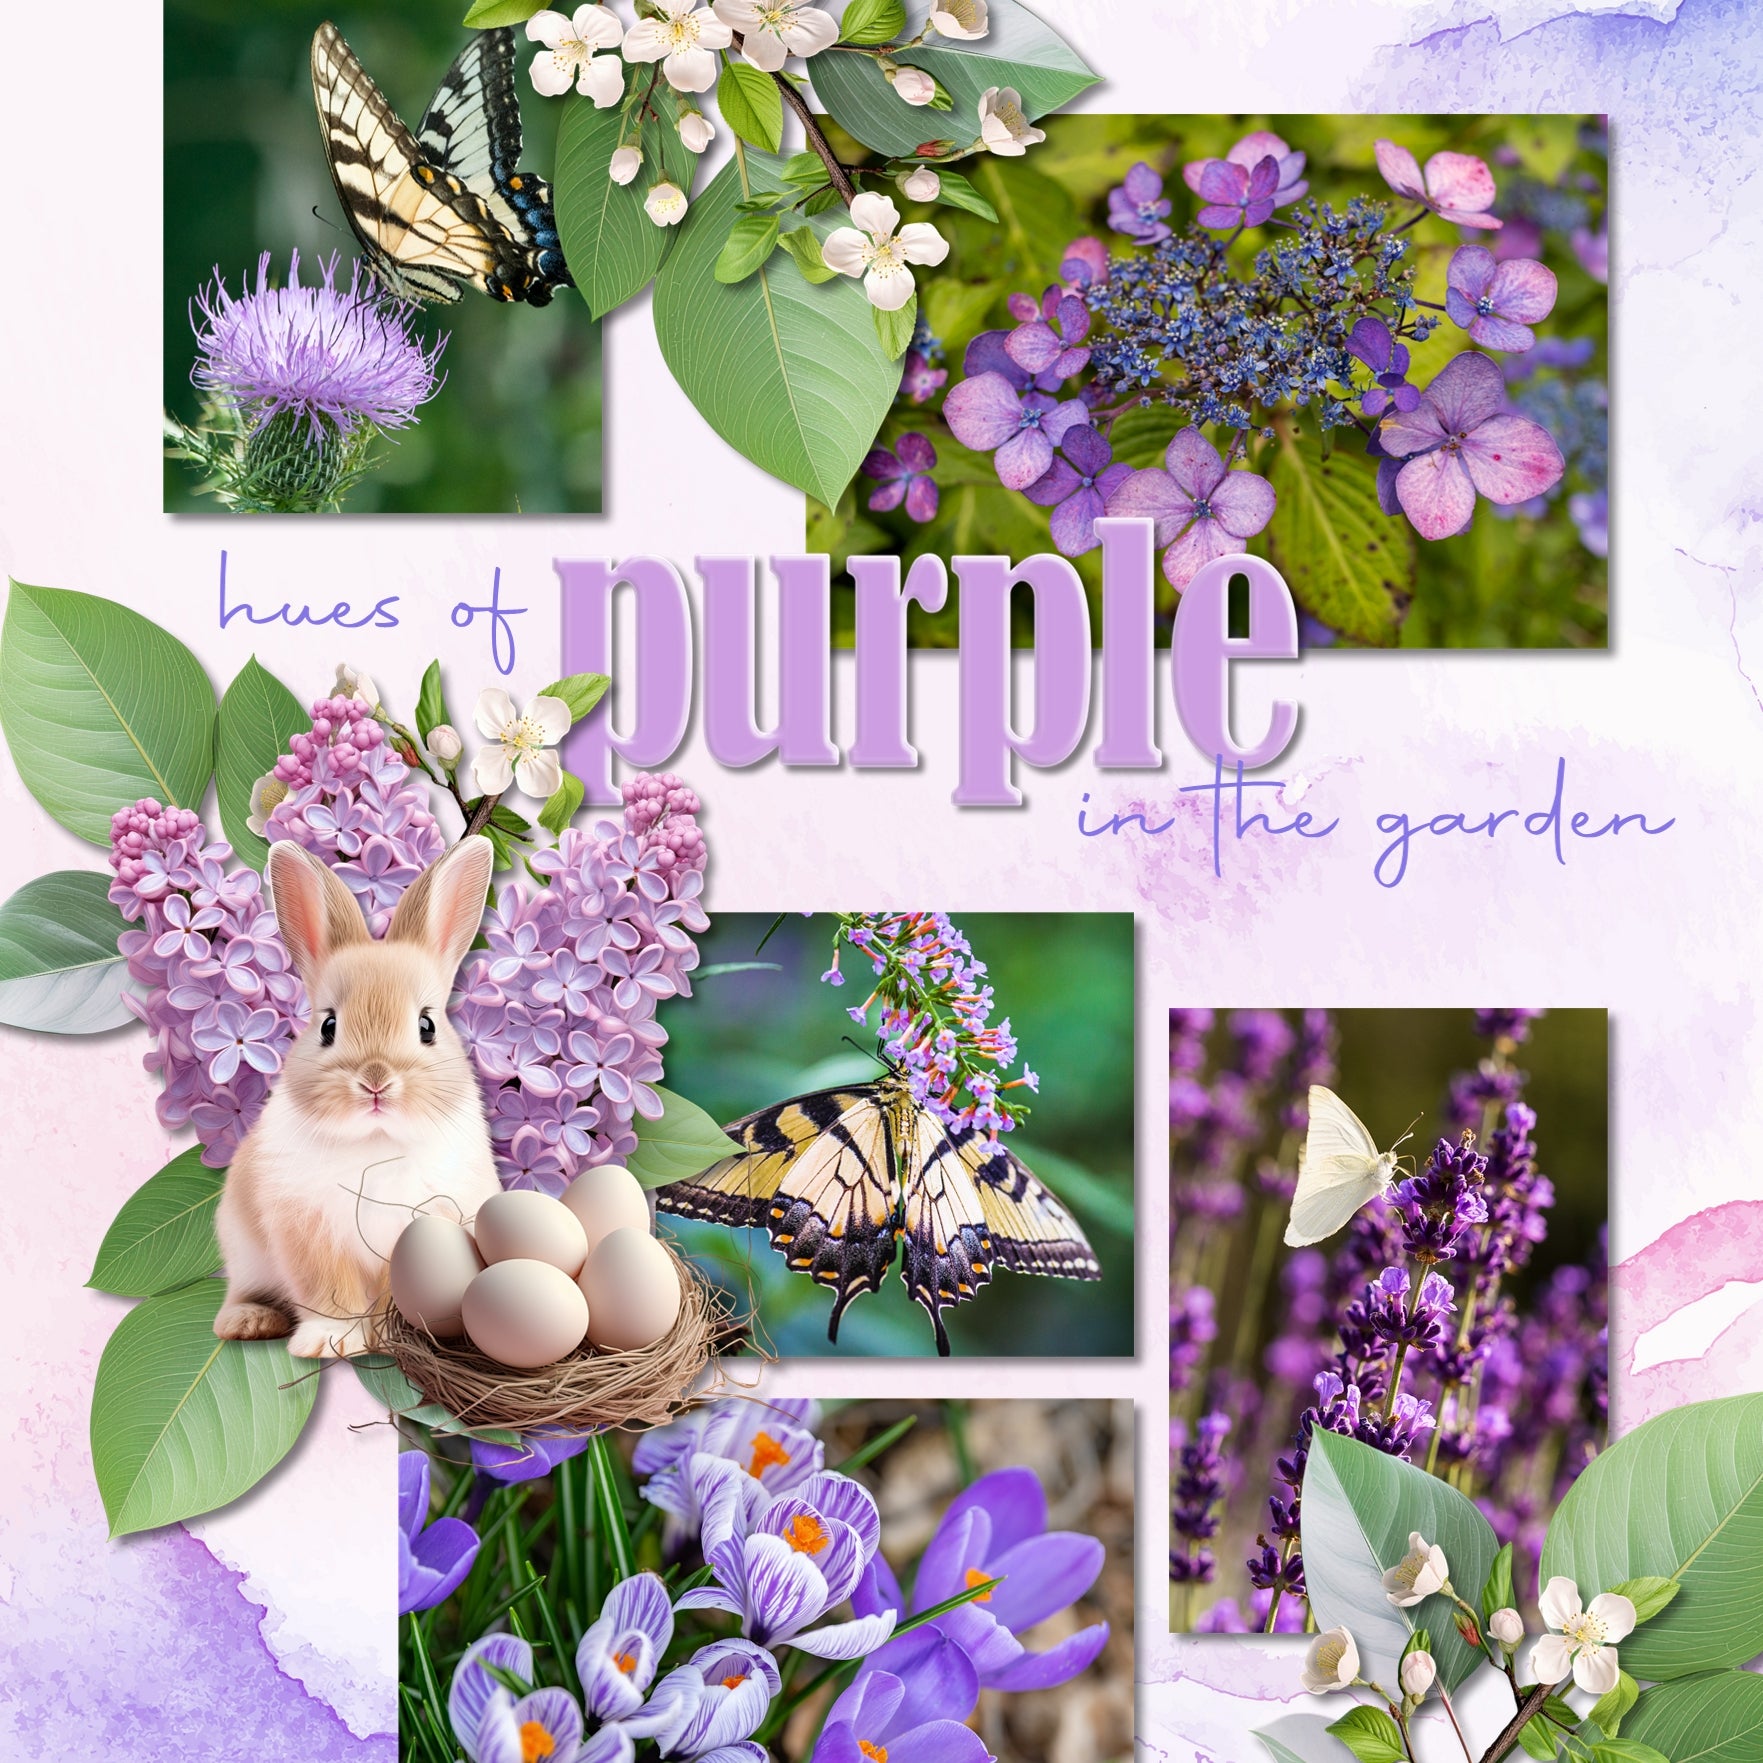 These fun and bright realistic digital scrapbooking embellishments by Lucky Girl Creative digital art are perfect for all your Easter, spring, and flower garden pages. Imagine the cute Easter Egg Hunt and Easter Bunny pages you could make!